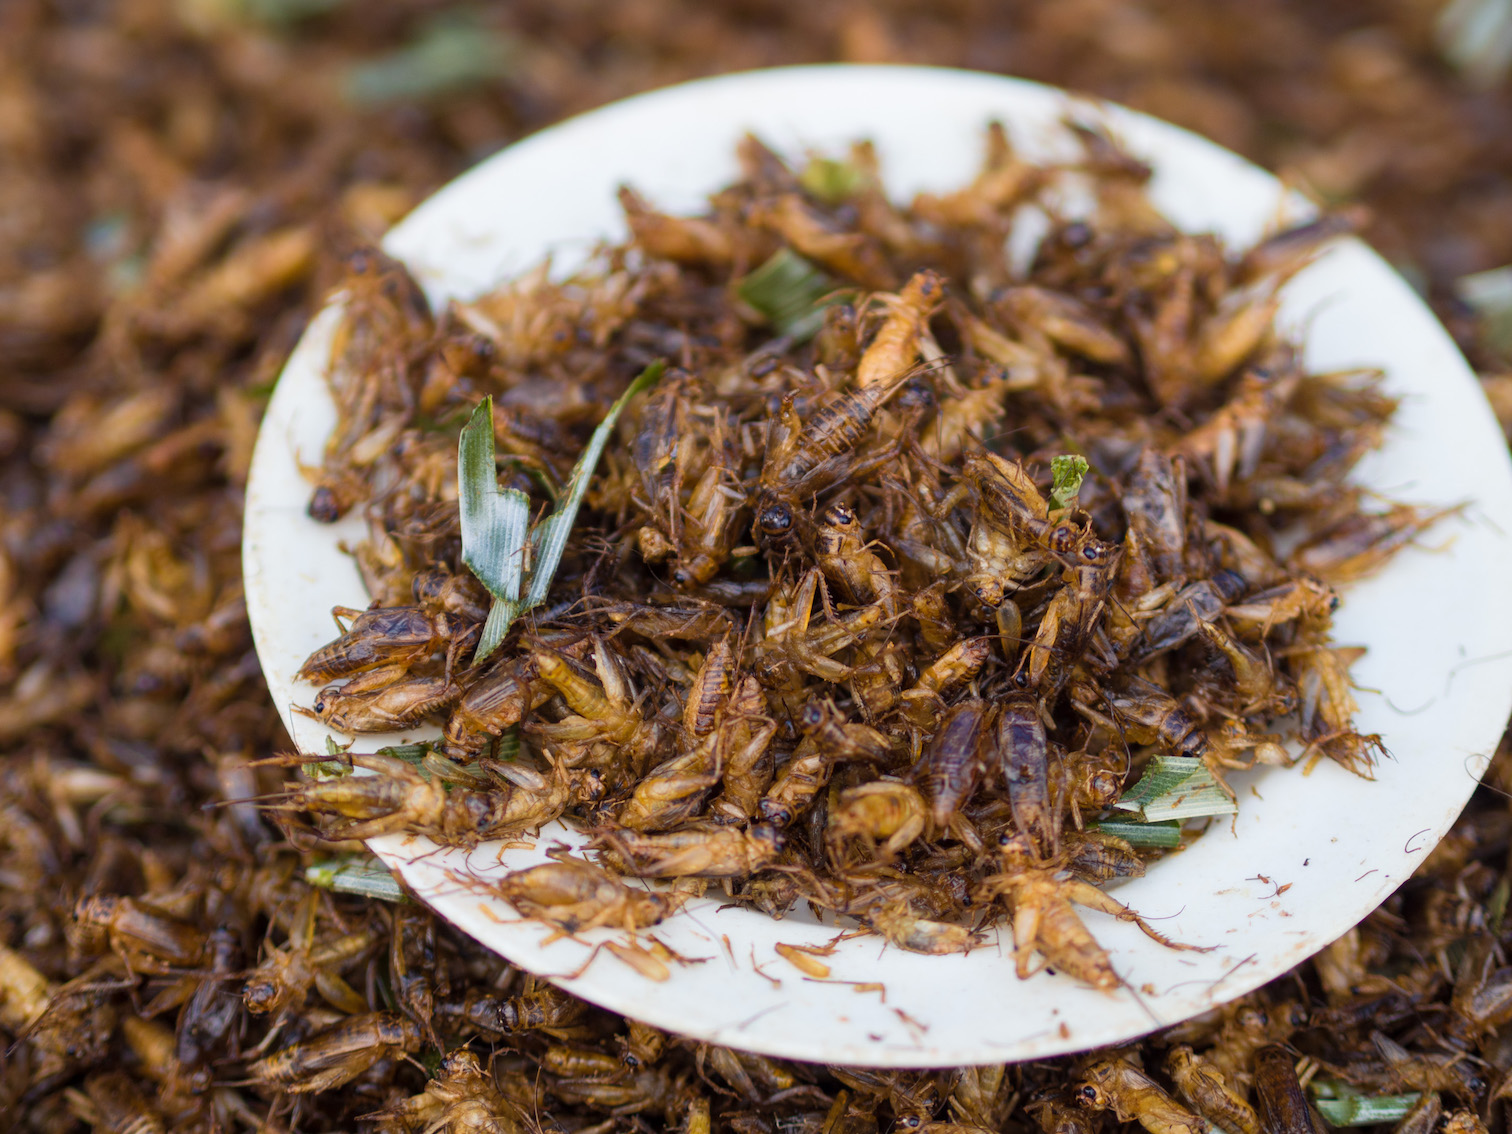 Image: Edible insects could be headed to UK supermarkets as global elites’ push to replace meat intensifies